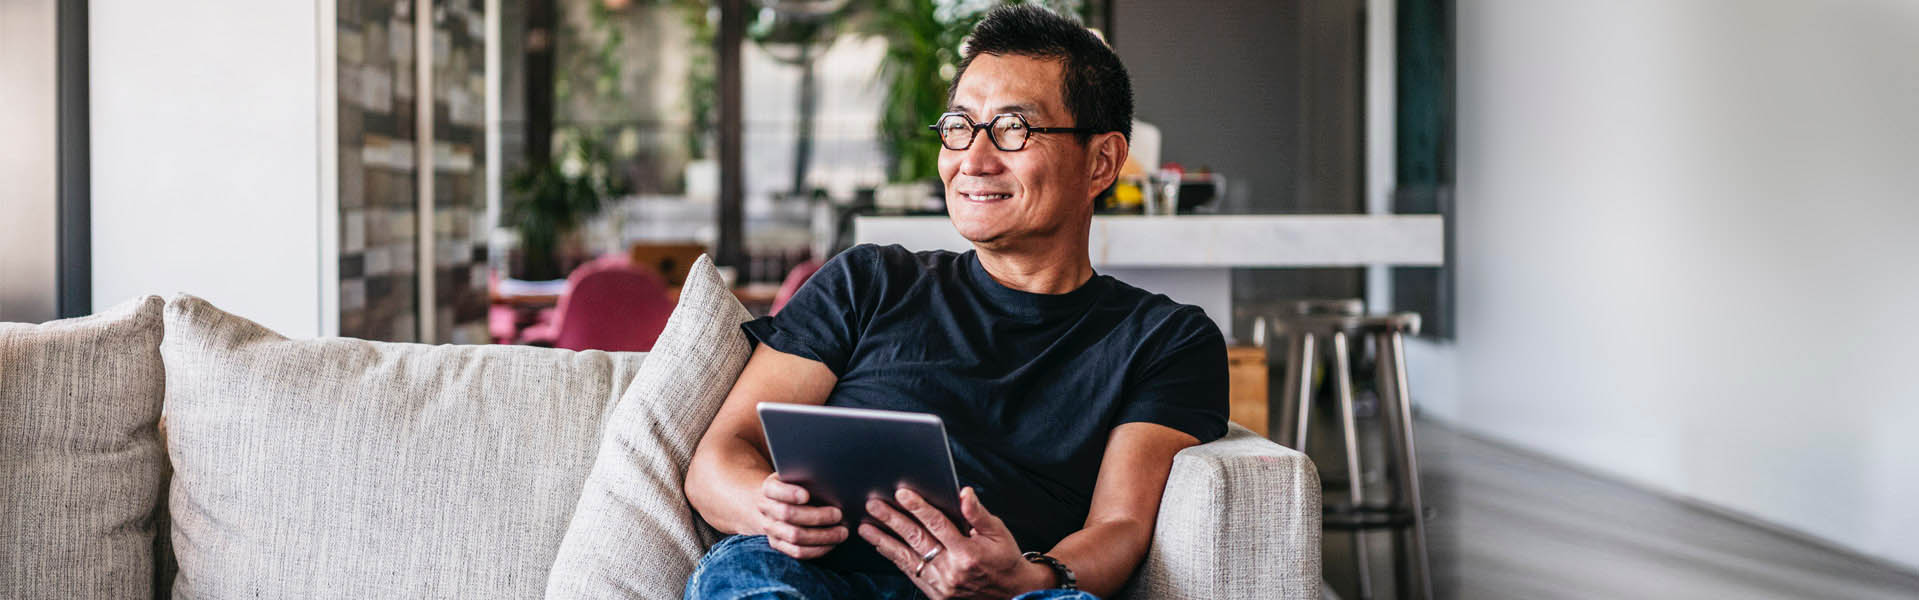 Person with glasses holding an electronic tablet. They are smiling and sitting on a couch in a living space.